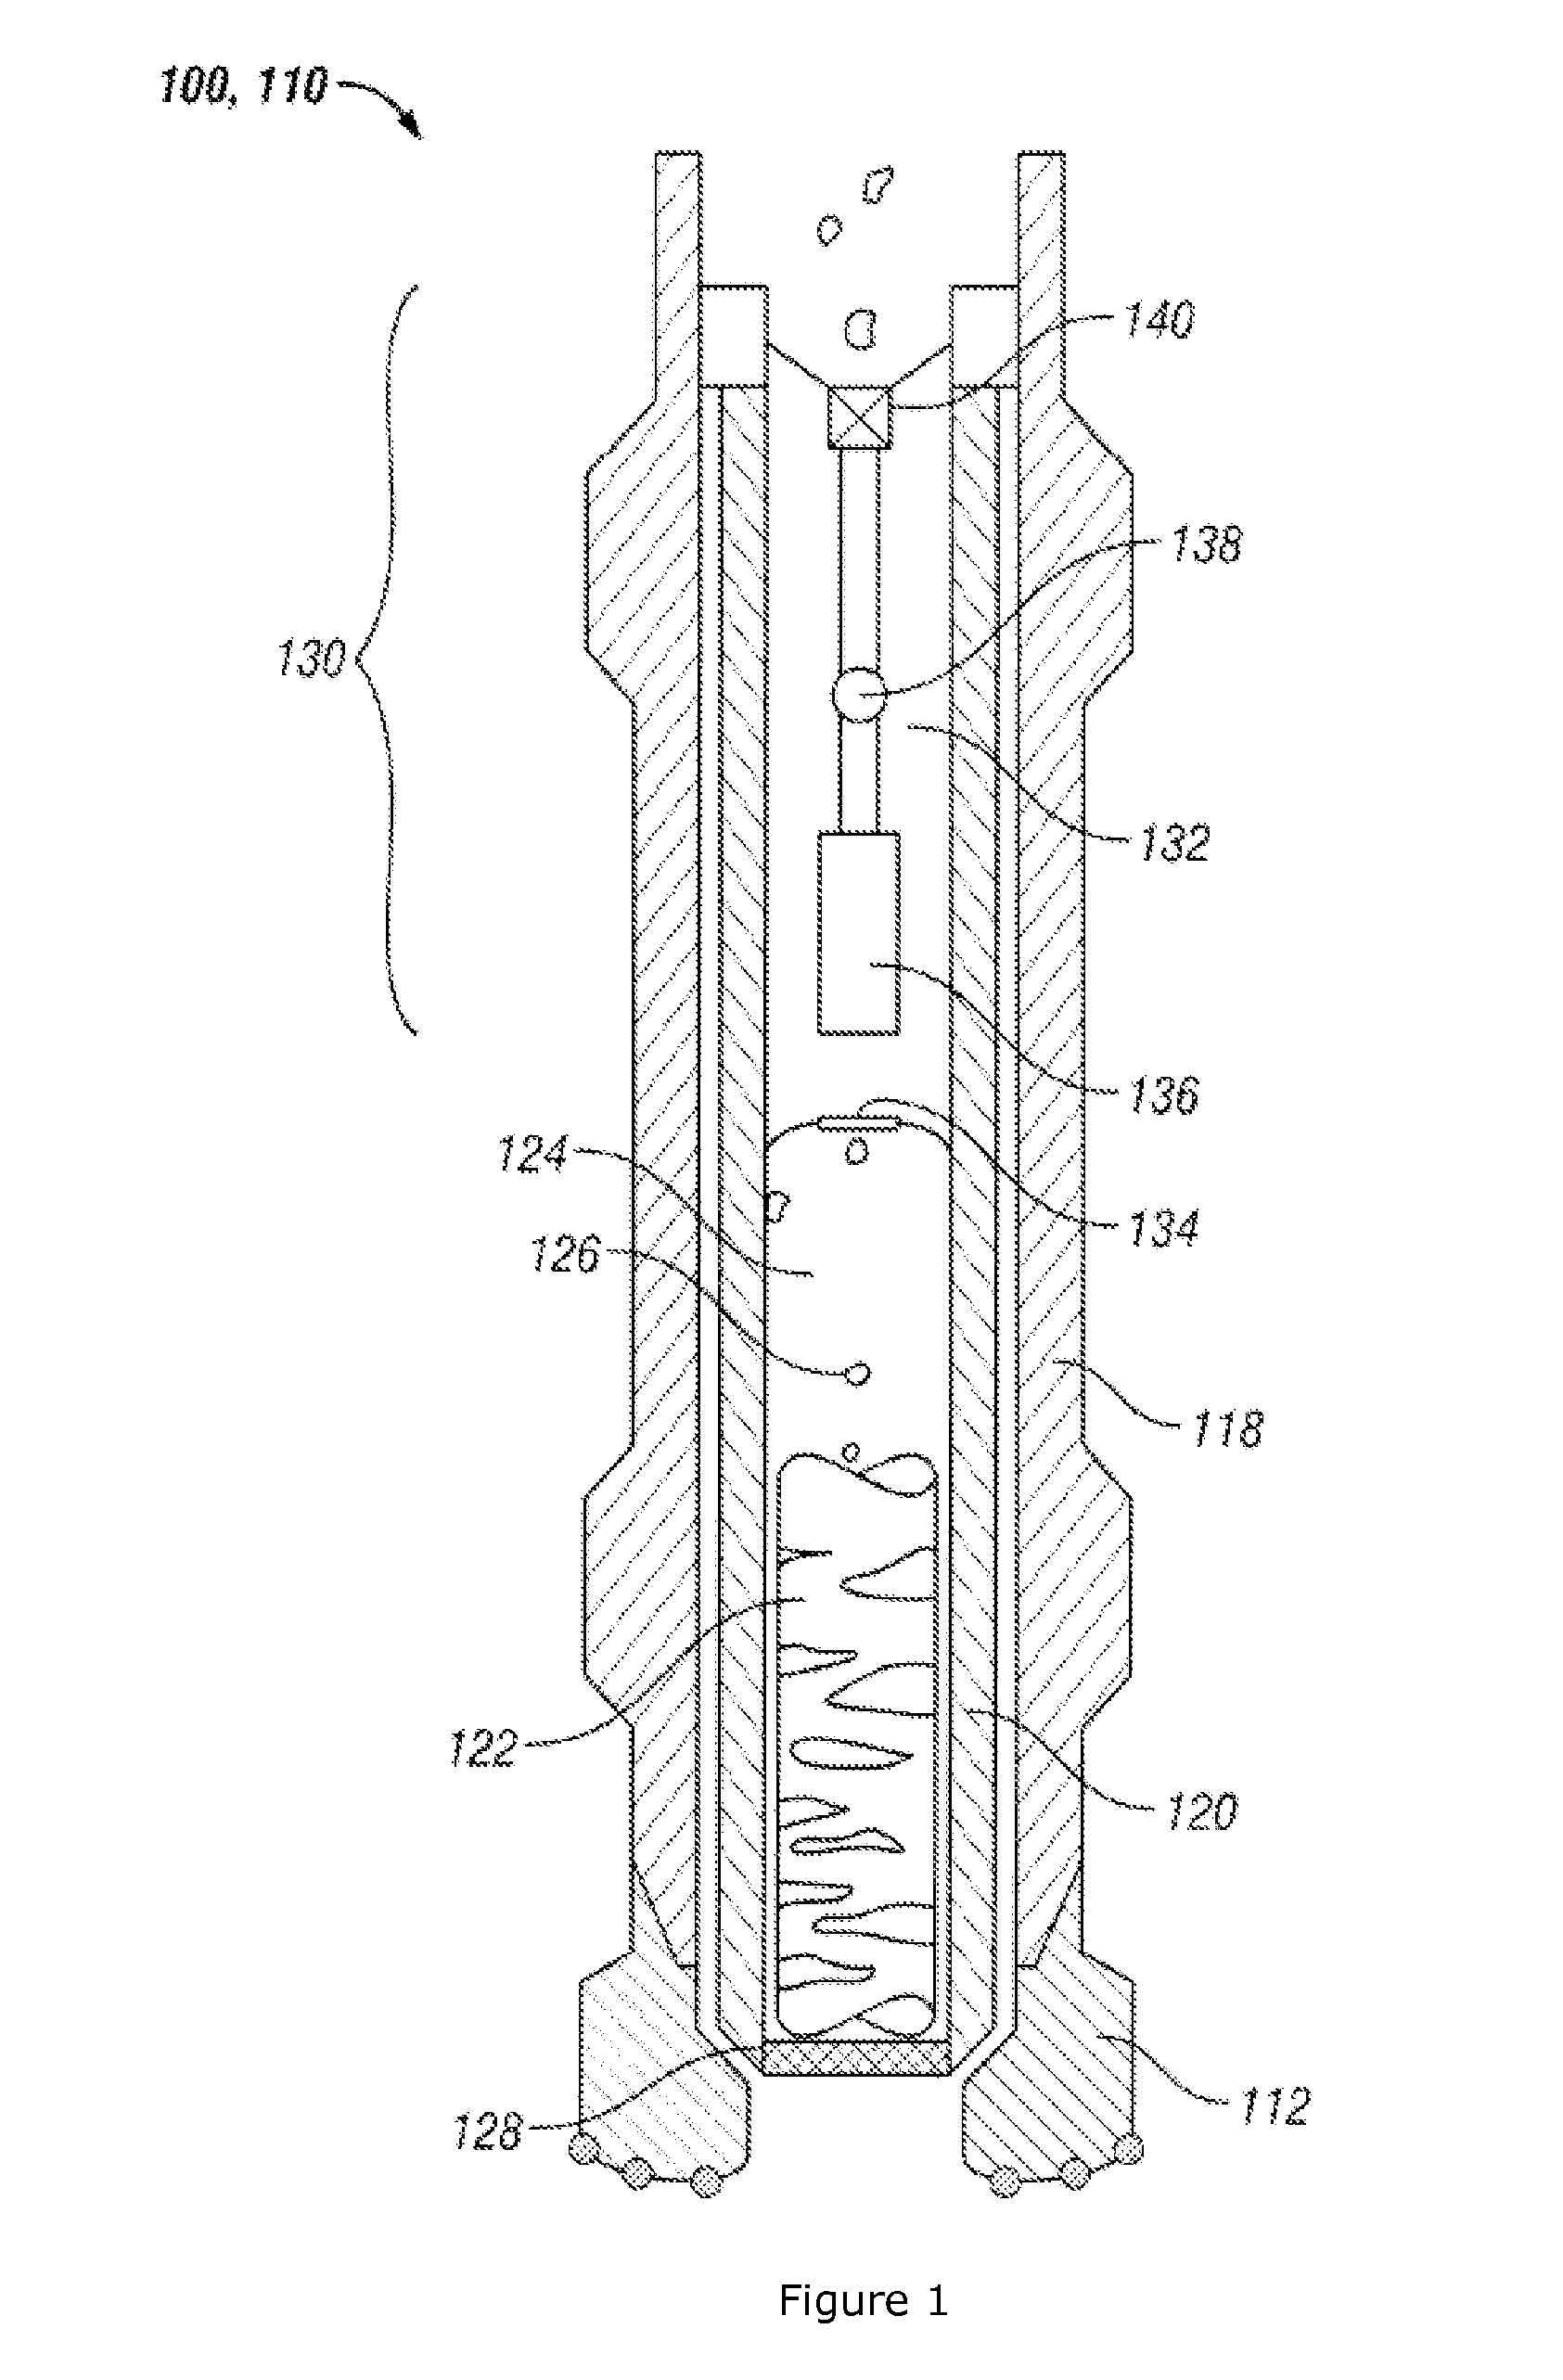 Instrumented Core Barrel Apparatus and Associated Methods